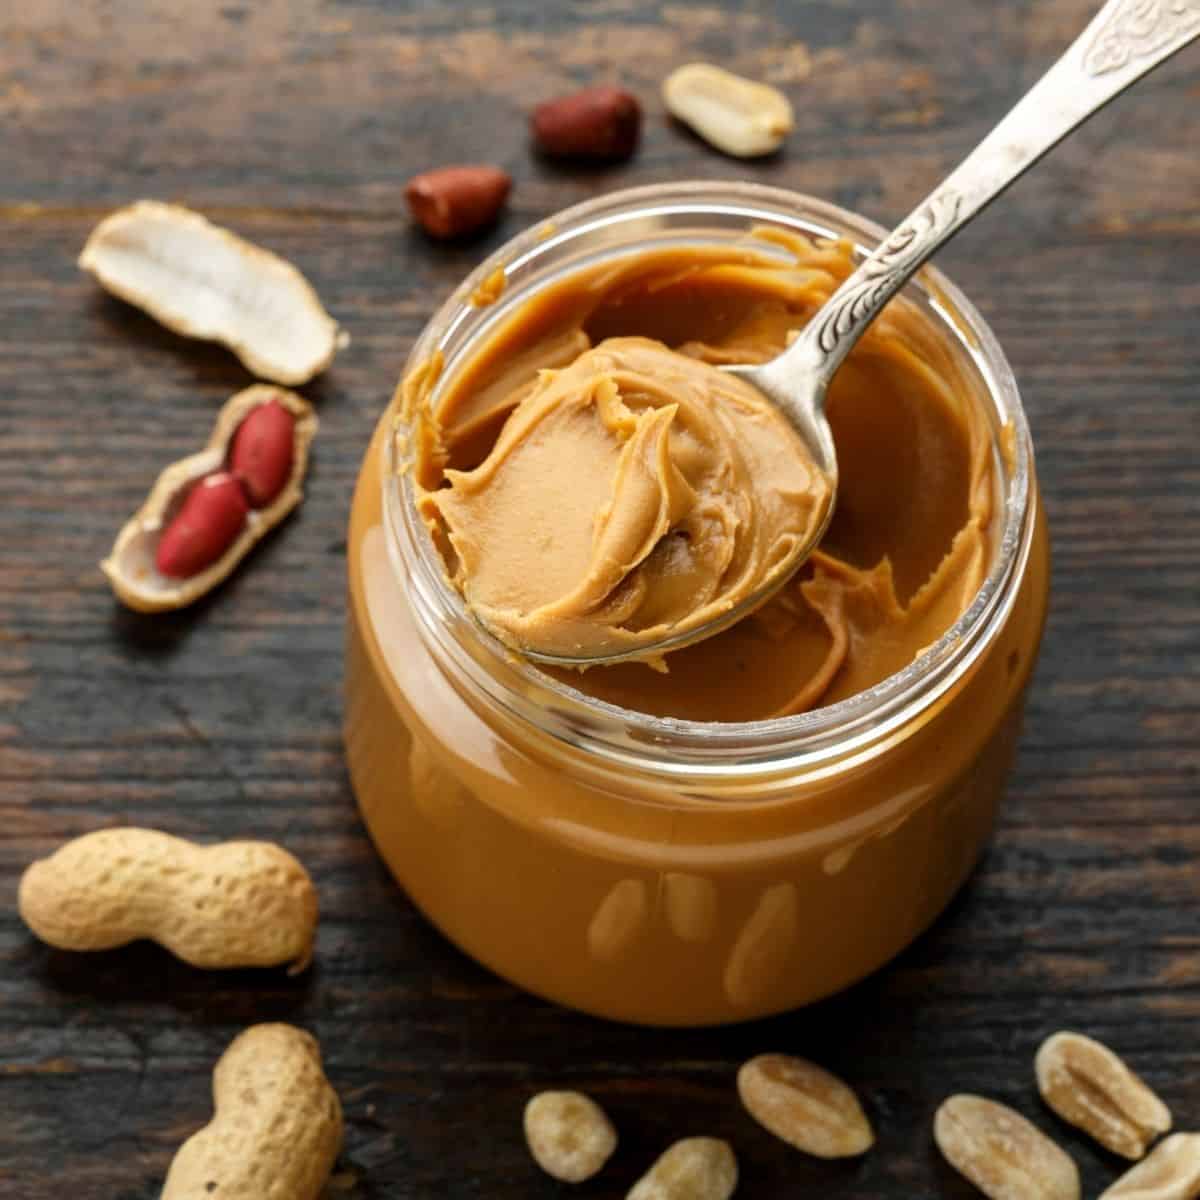 Peanut butter jar with spoon. 
